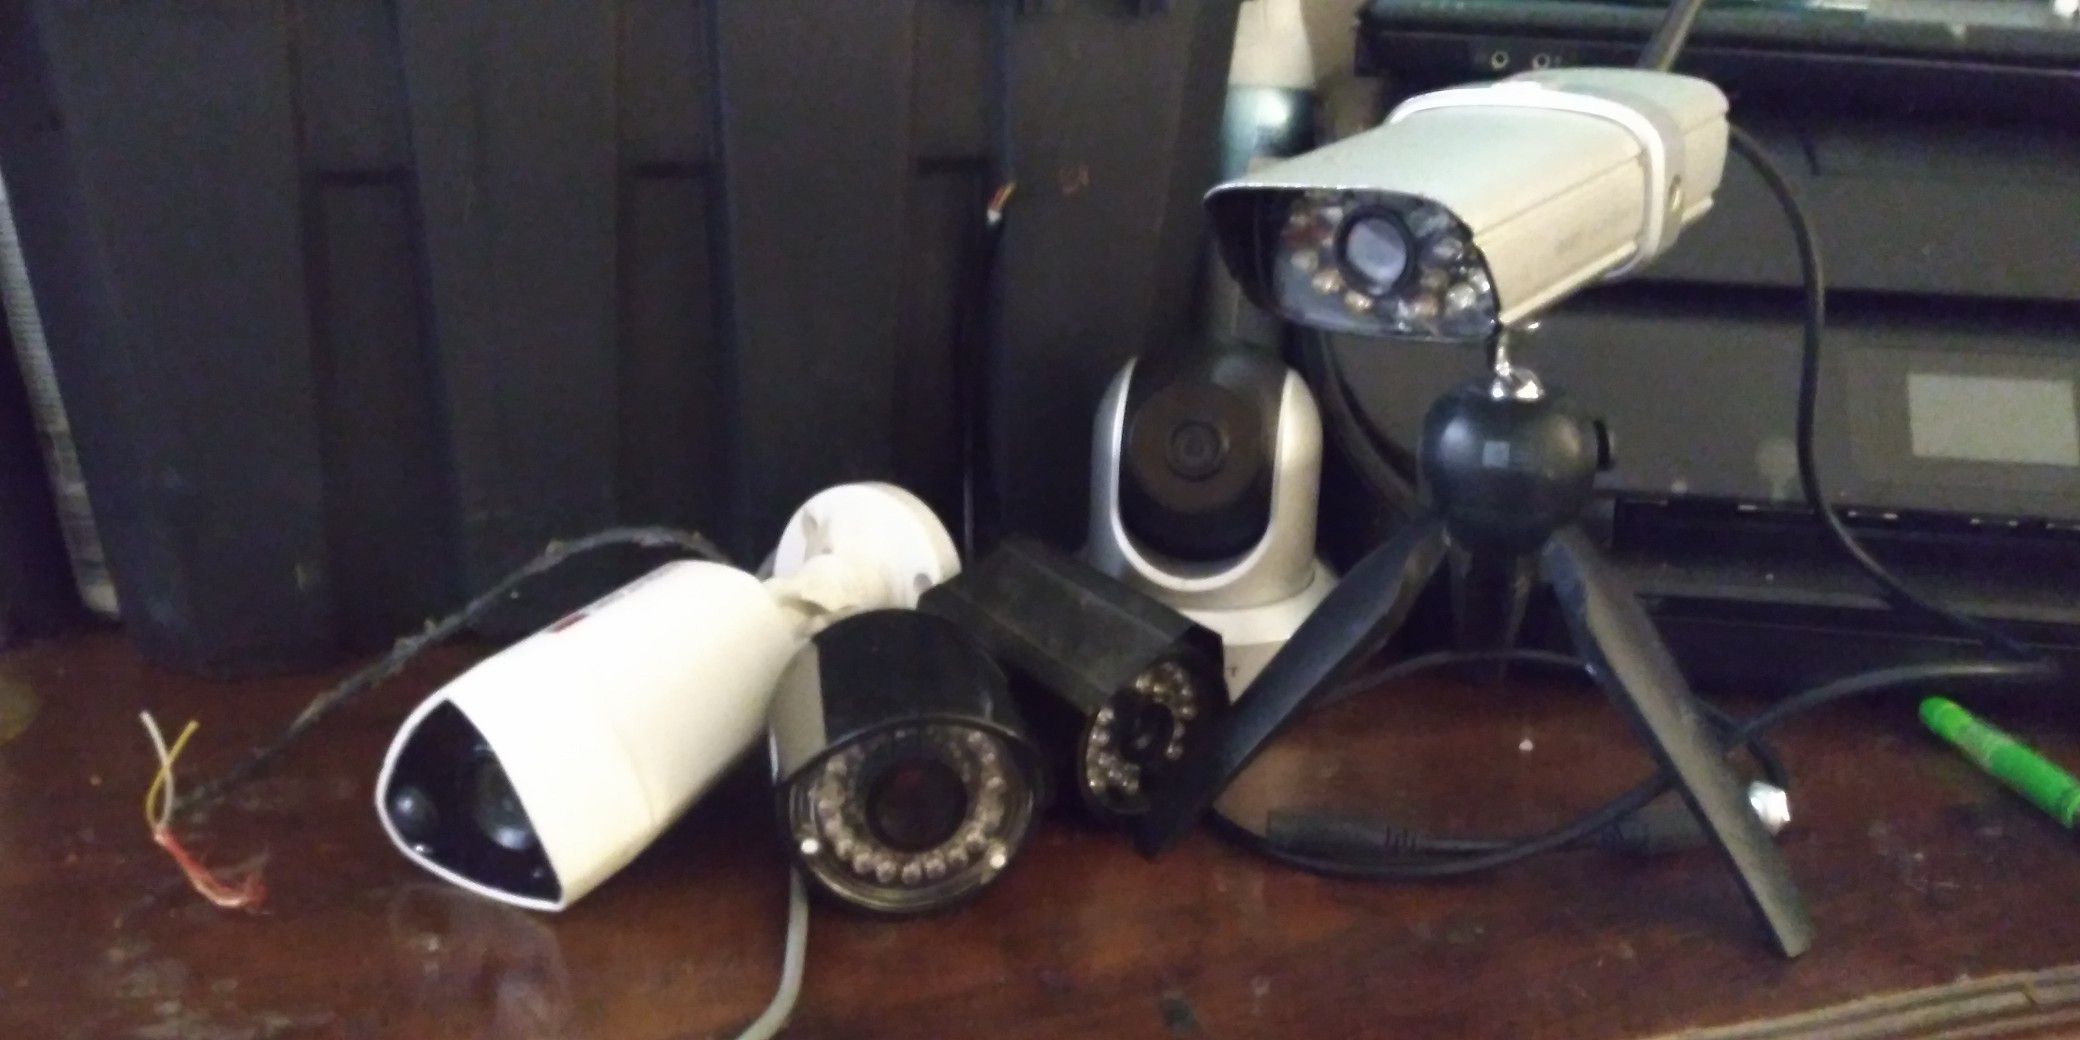 Lot of 5 security cameras